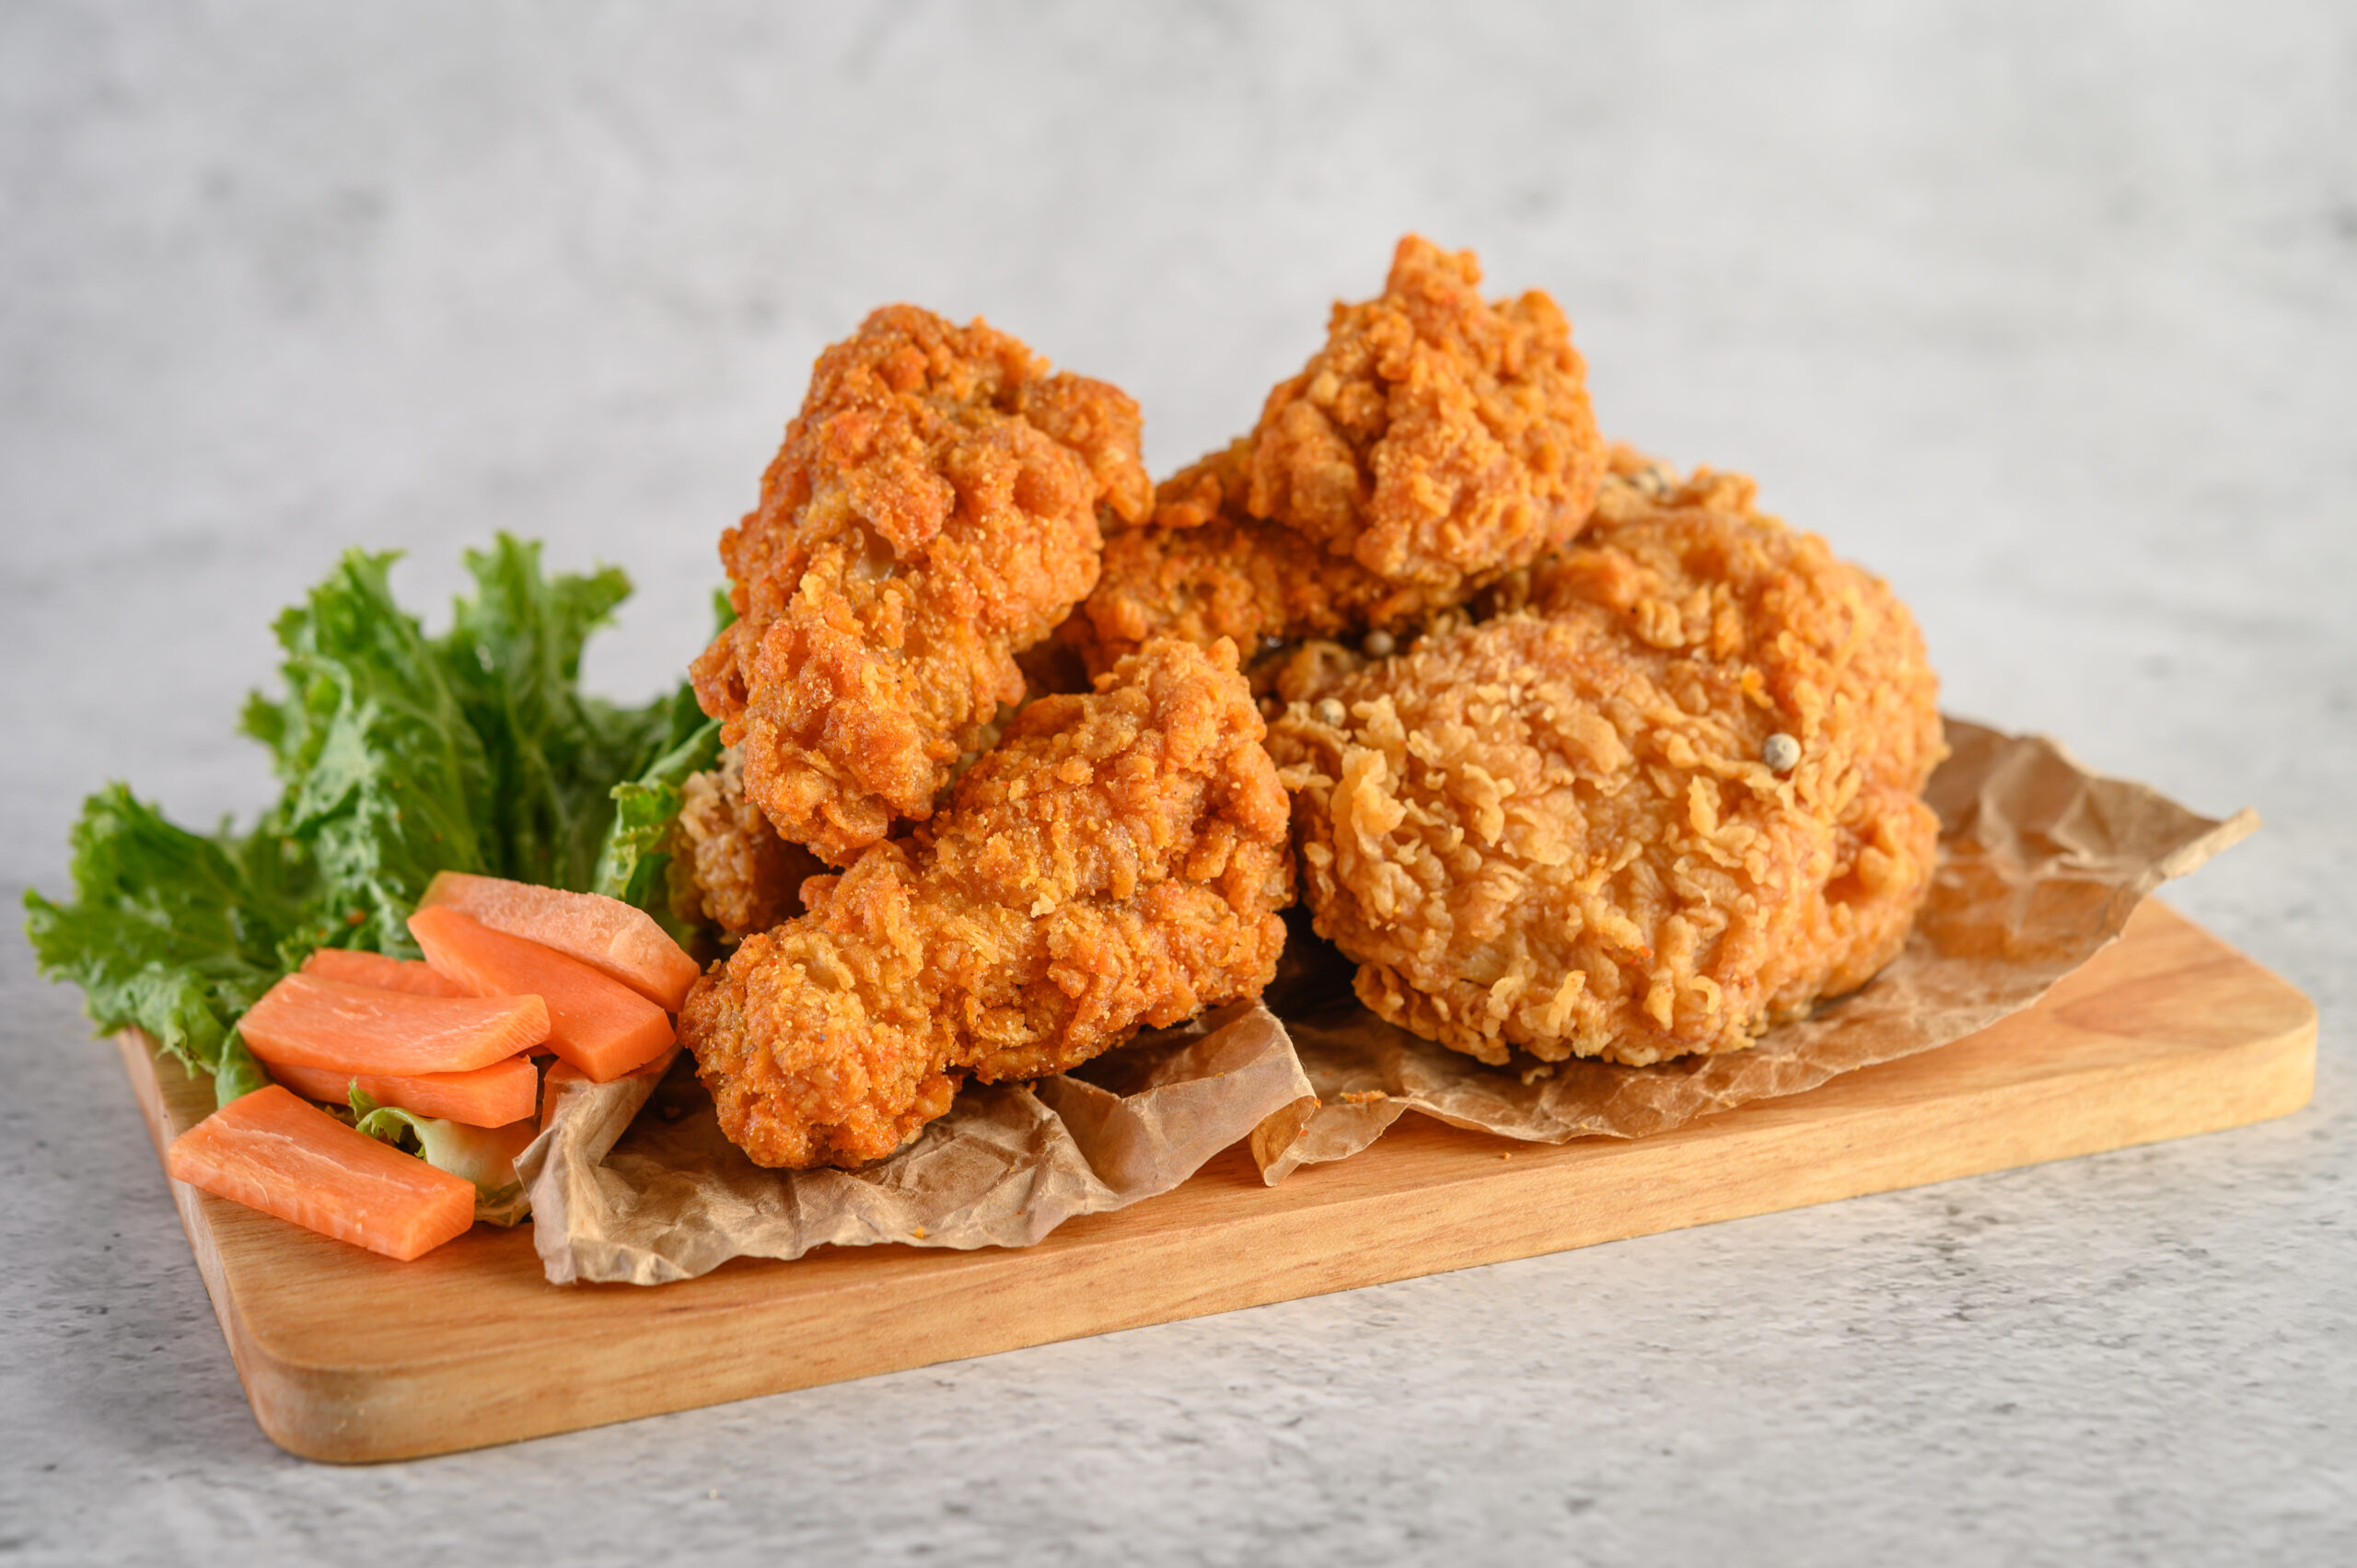 How Long Does Fried Chicken take to Cook?